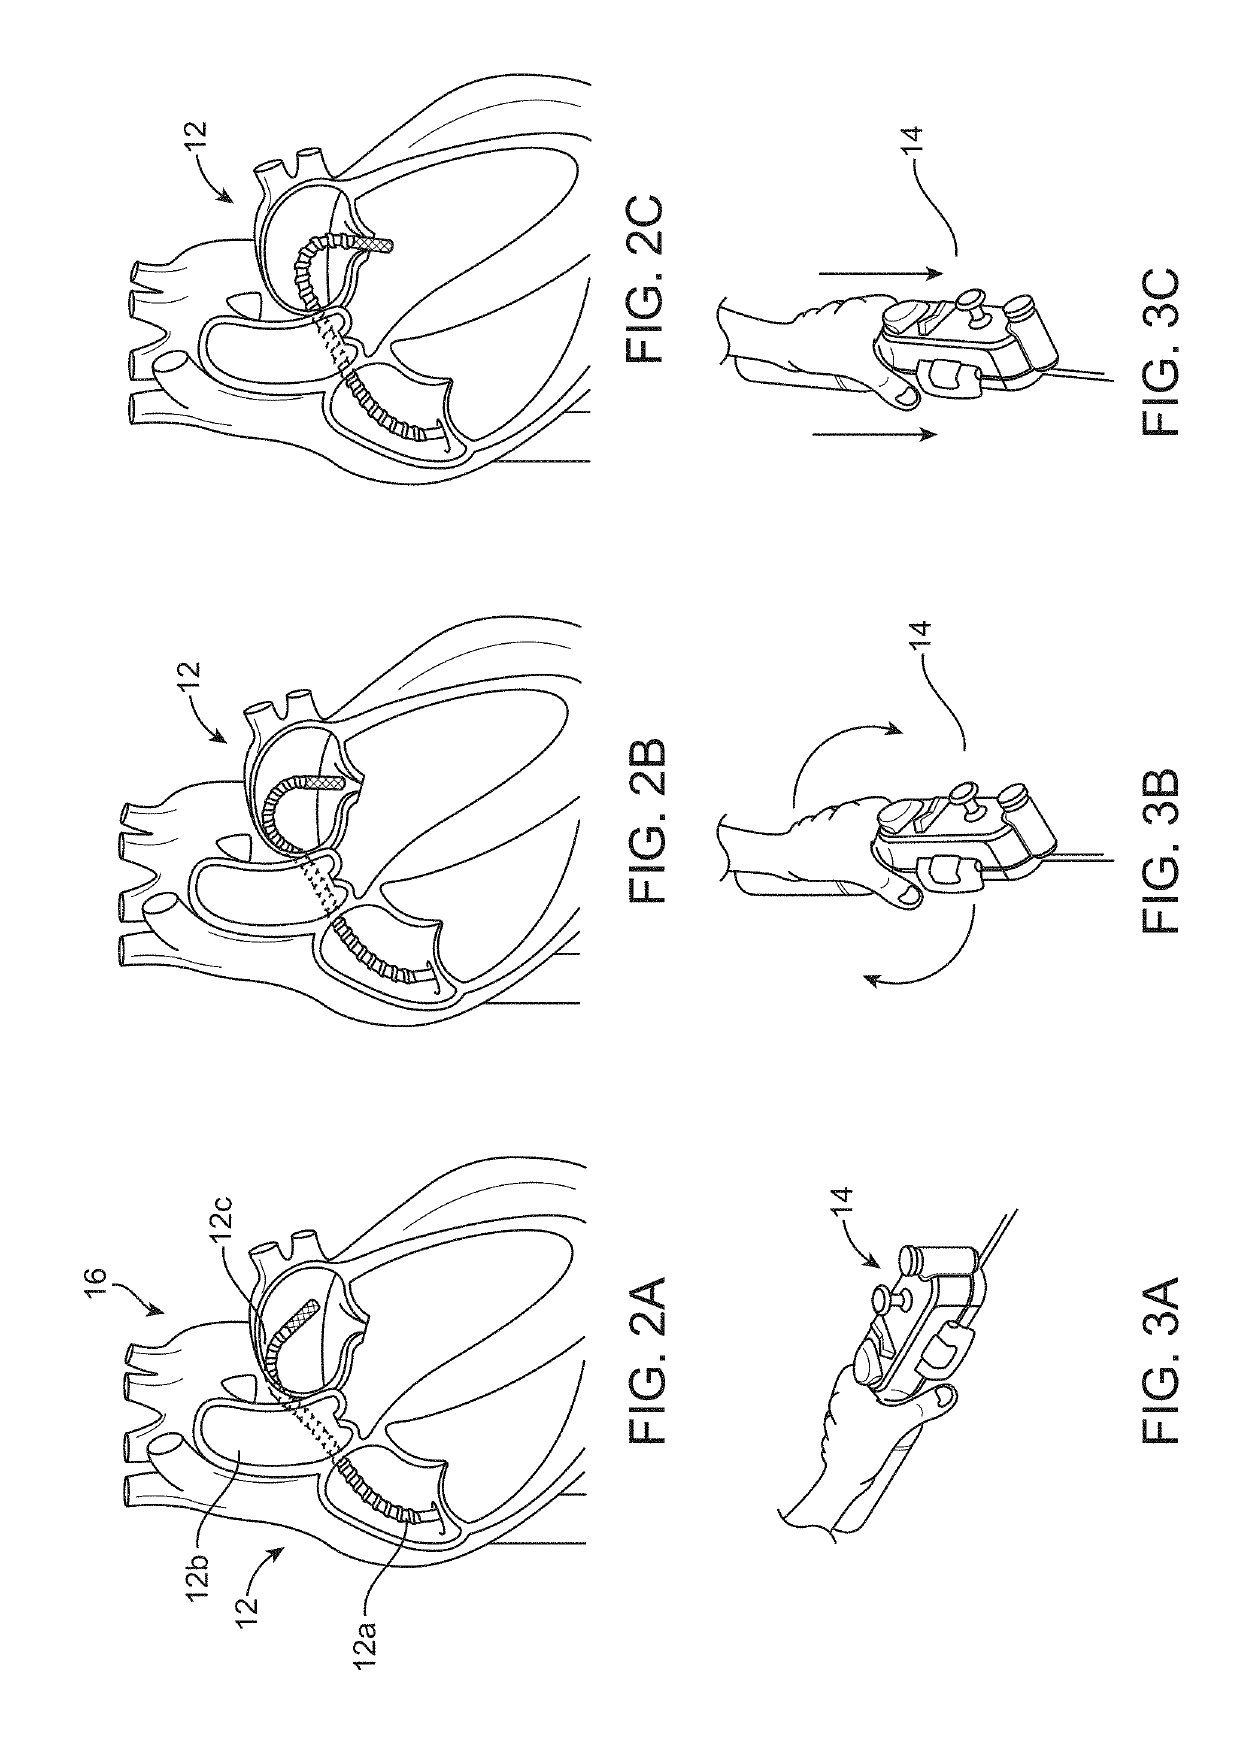 Matrix supported balloon articulation systems, devices, and methods for catheters and other uses